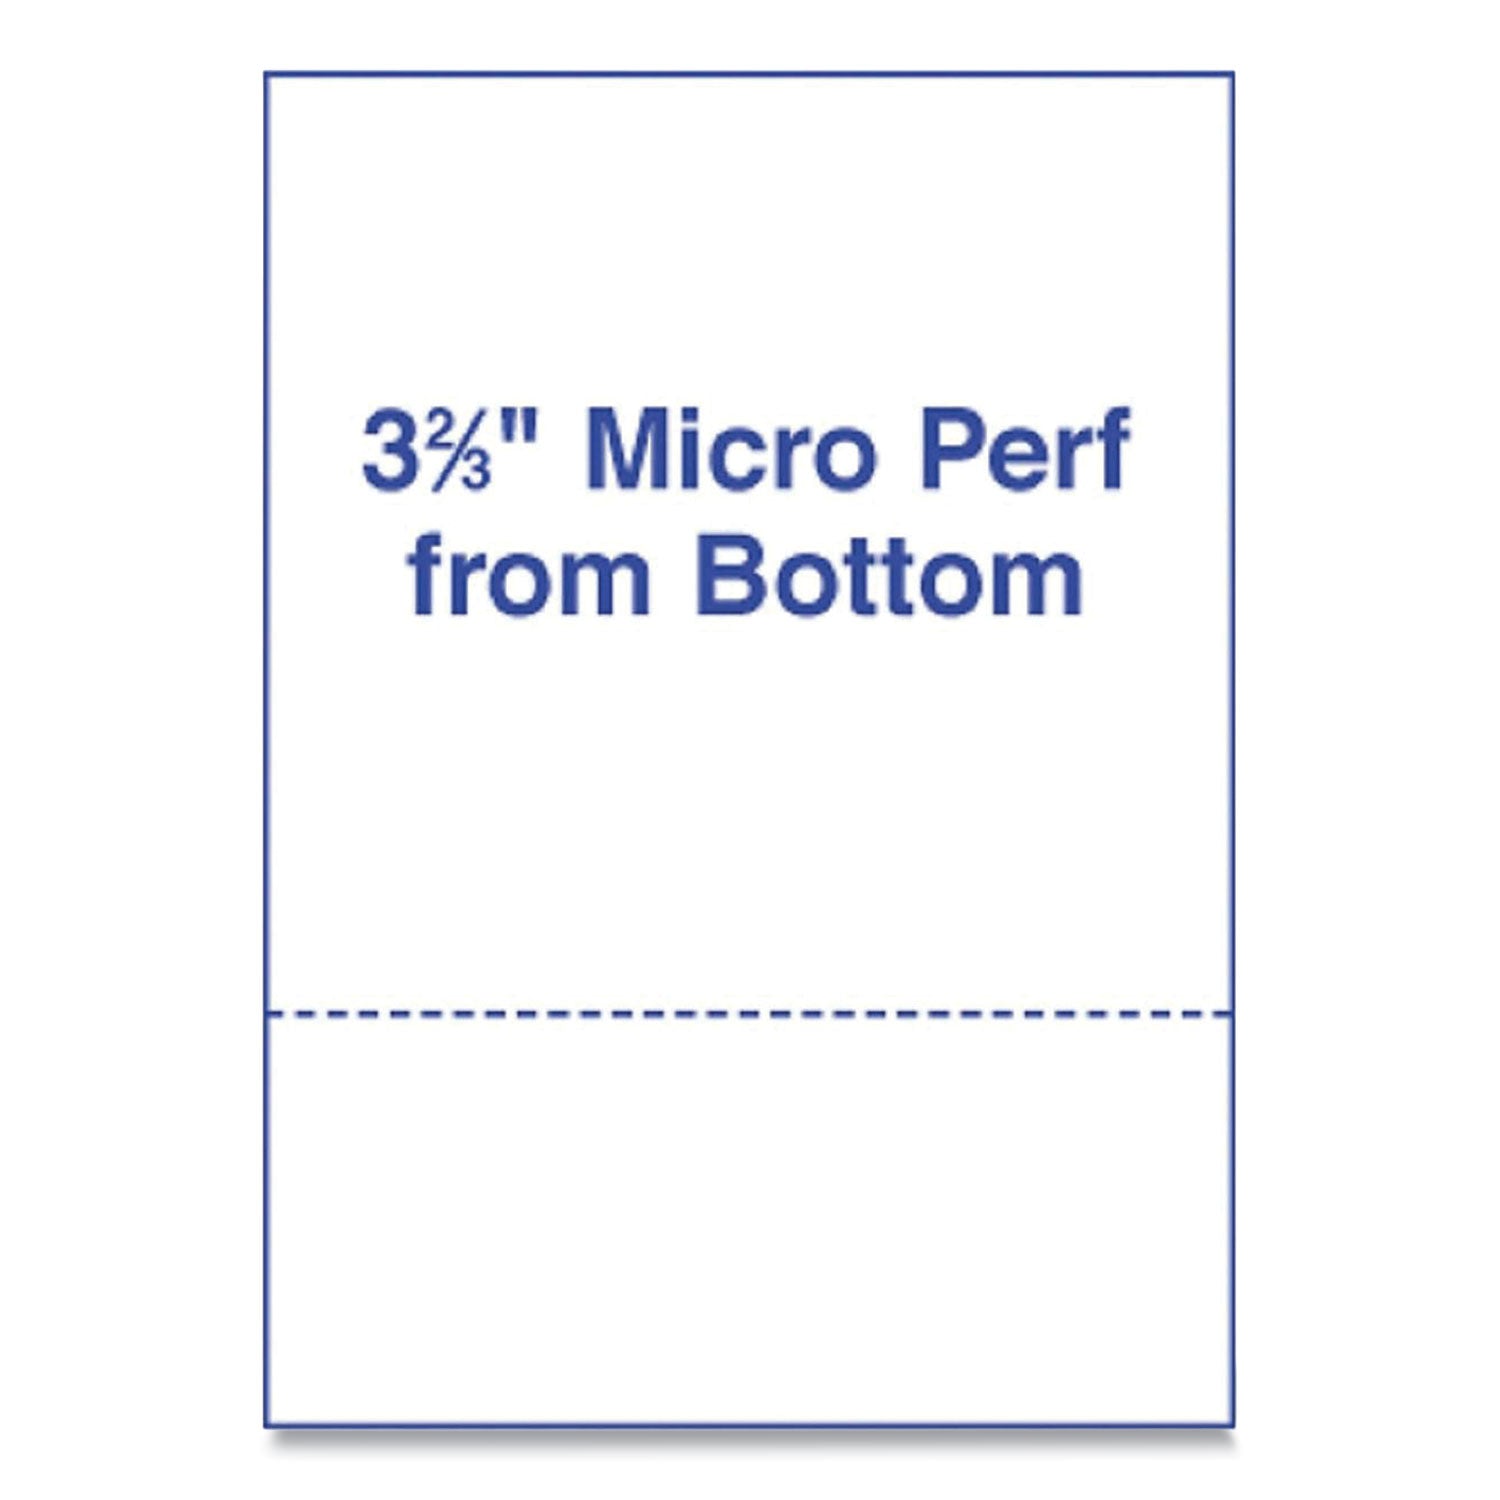 perforated-and-punched-laser-cut-sheets-micro-perforated-367-from-bottom-24-lb-bond-weight-85-x-11-white-500-ream_tst30044 - 1